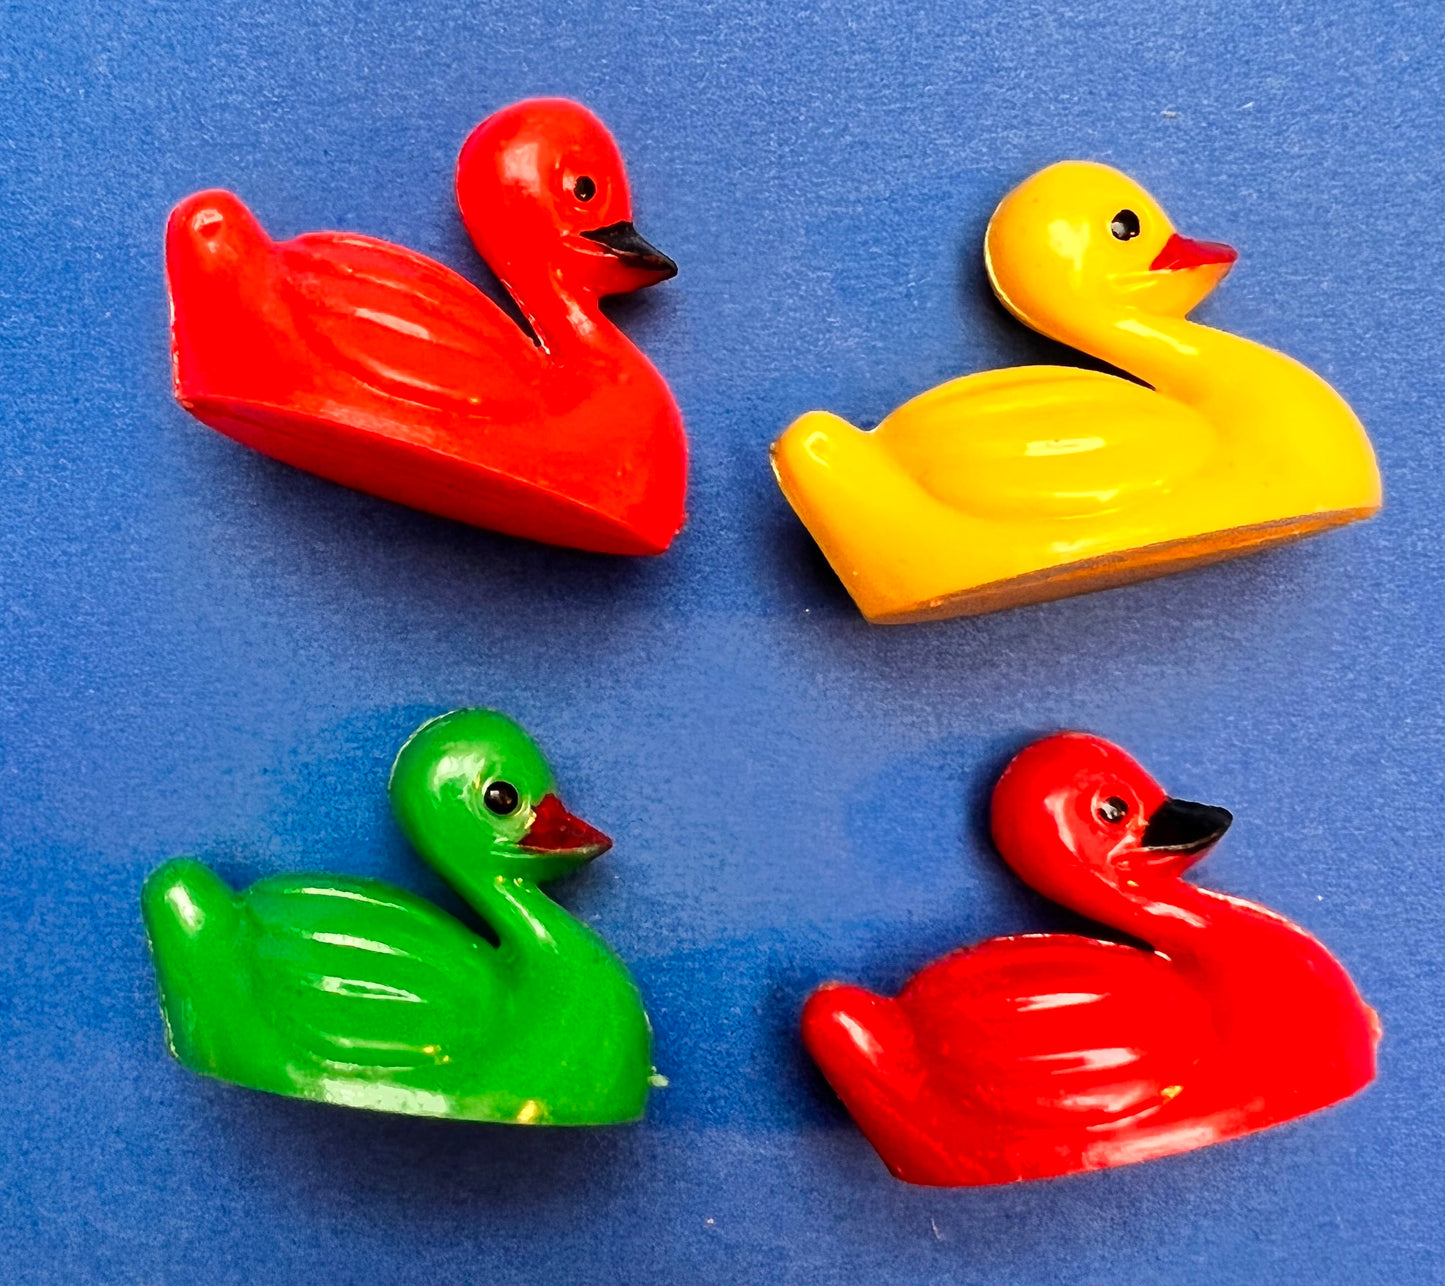 4 Cheeky Vintage Plastic Duck Rattles... They take NO Nonsense...